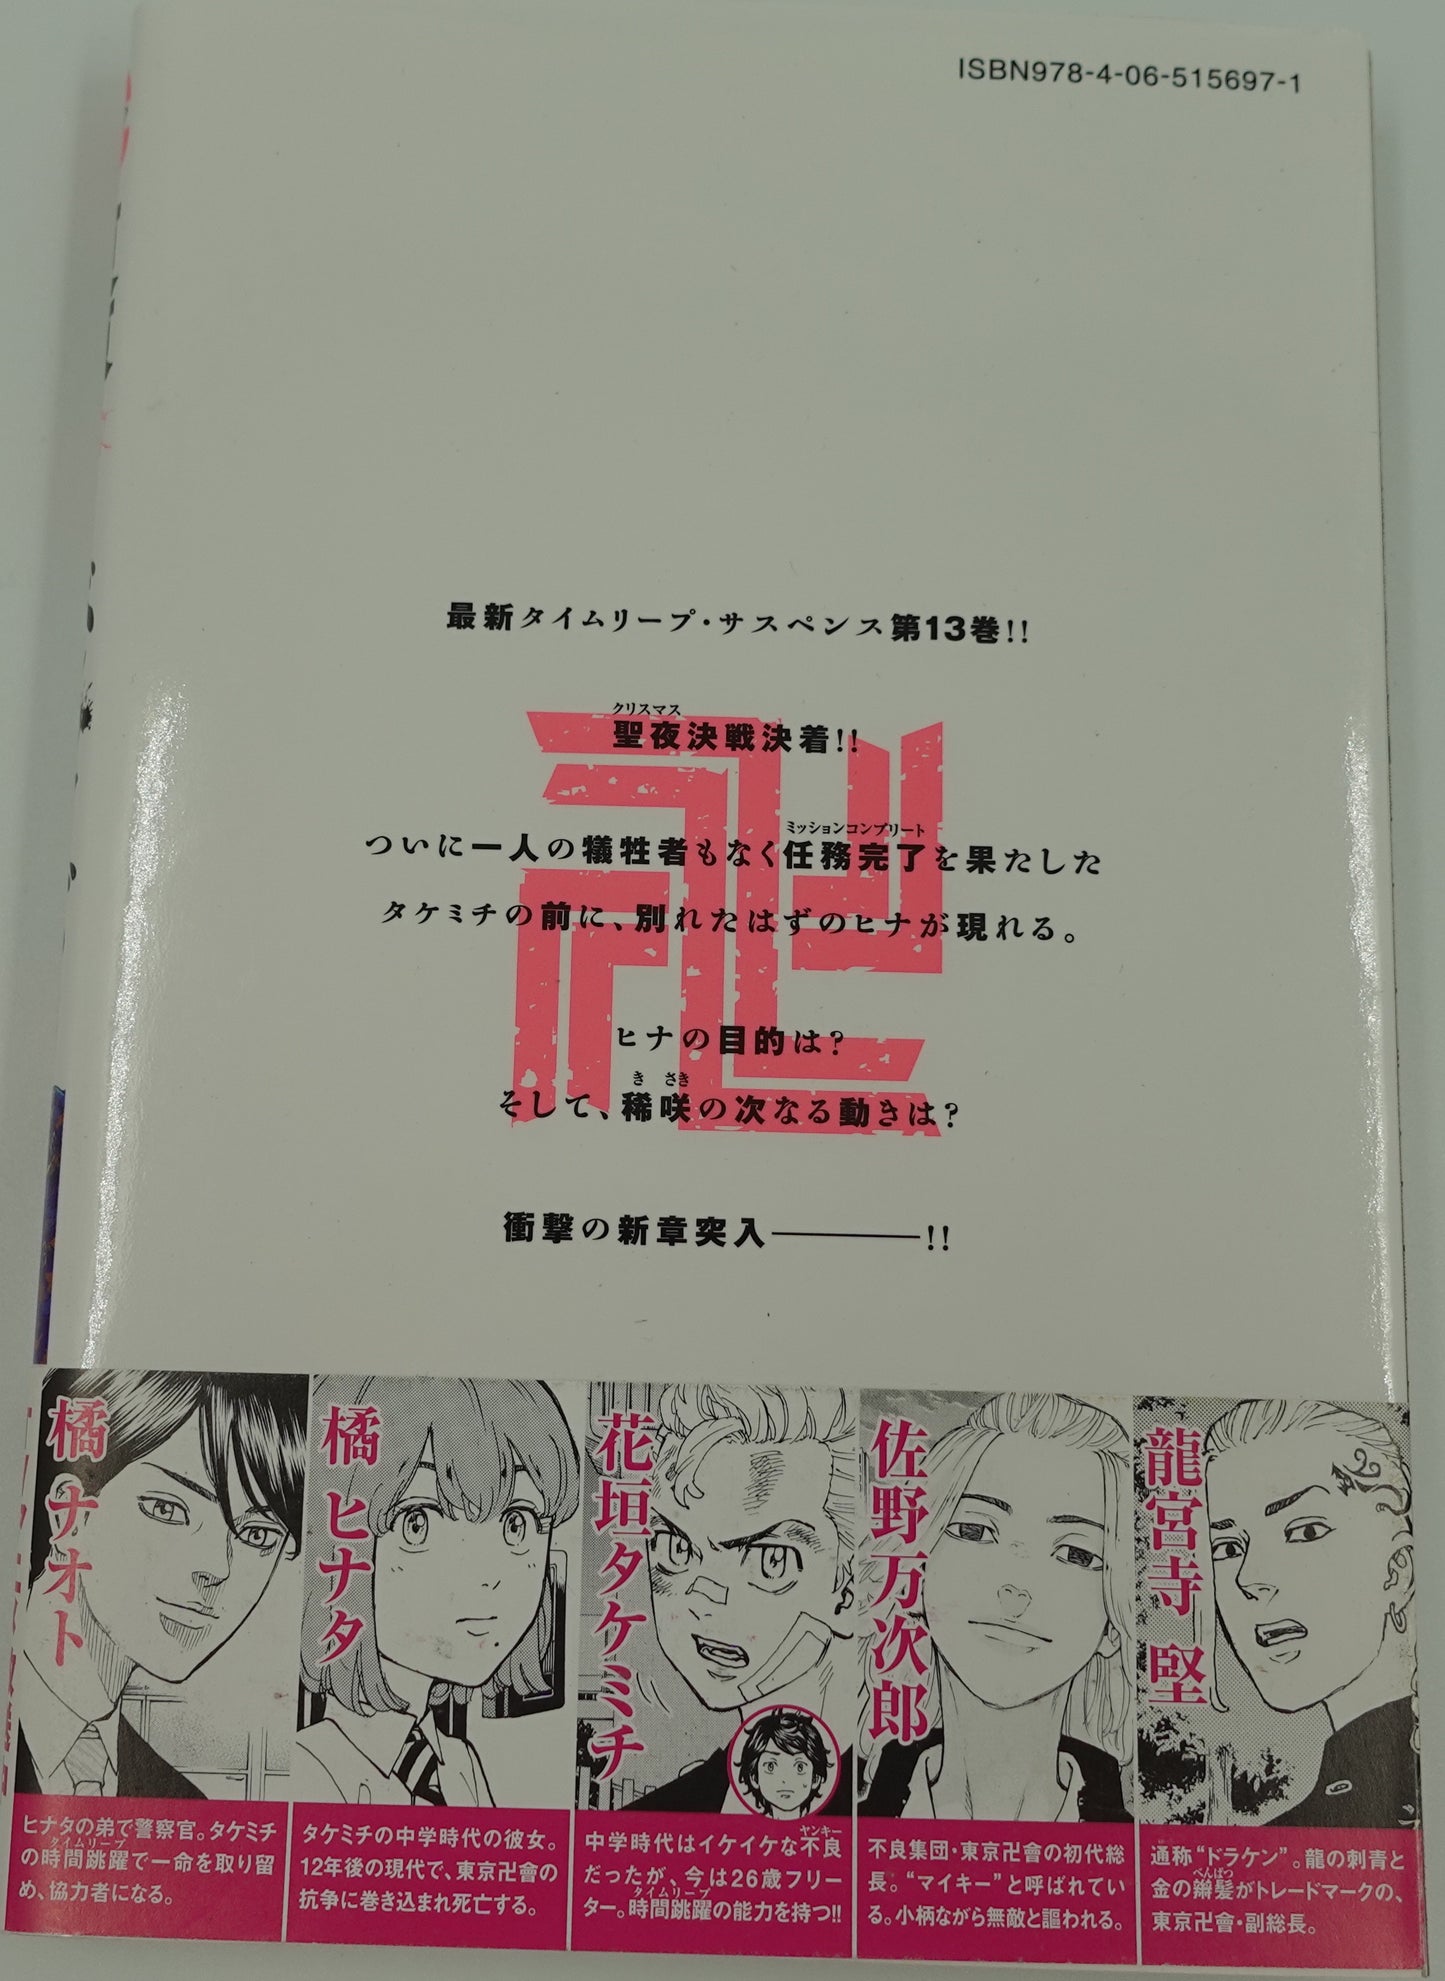 Tokyo Revengers Vol.13- Official Japanese Edition